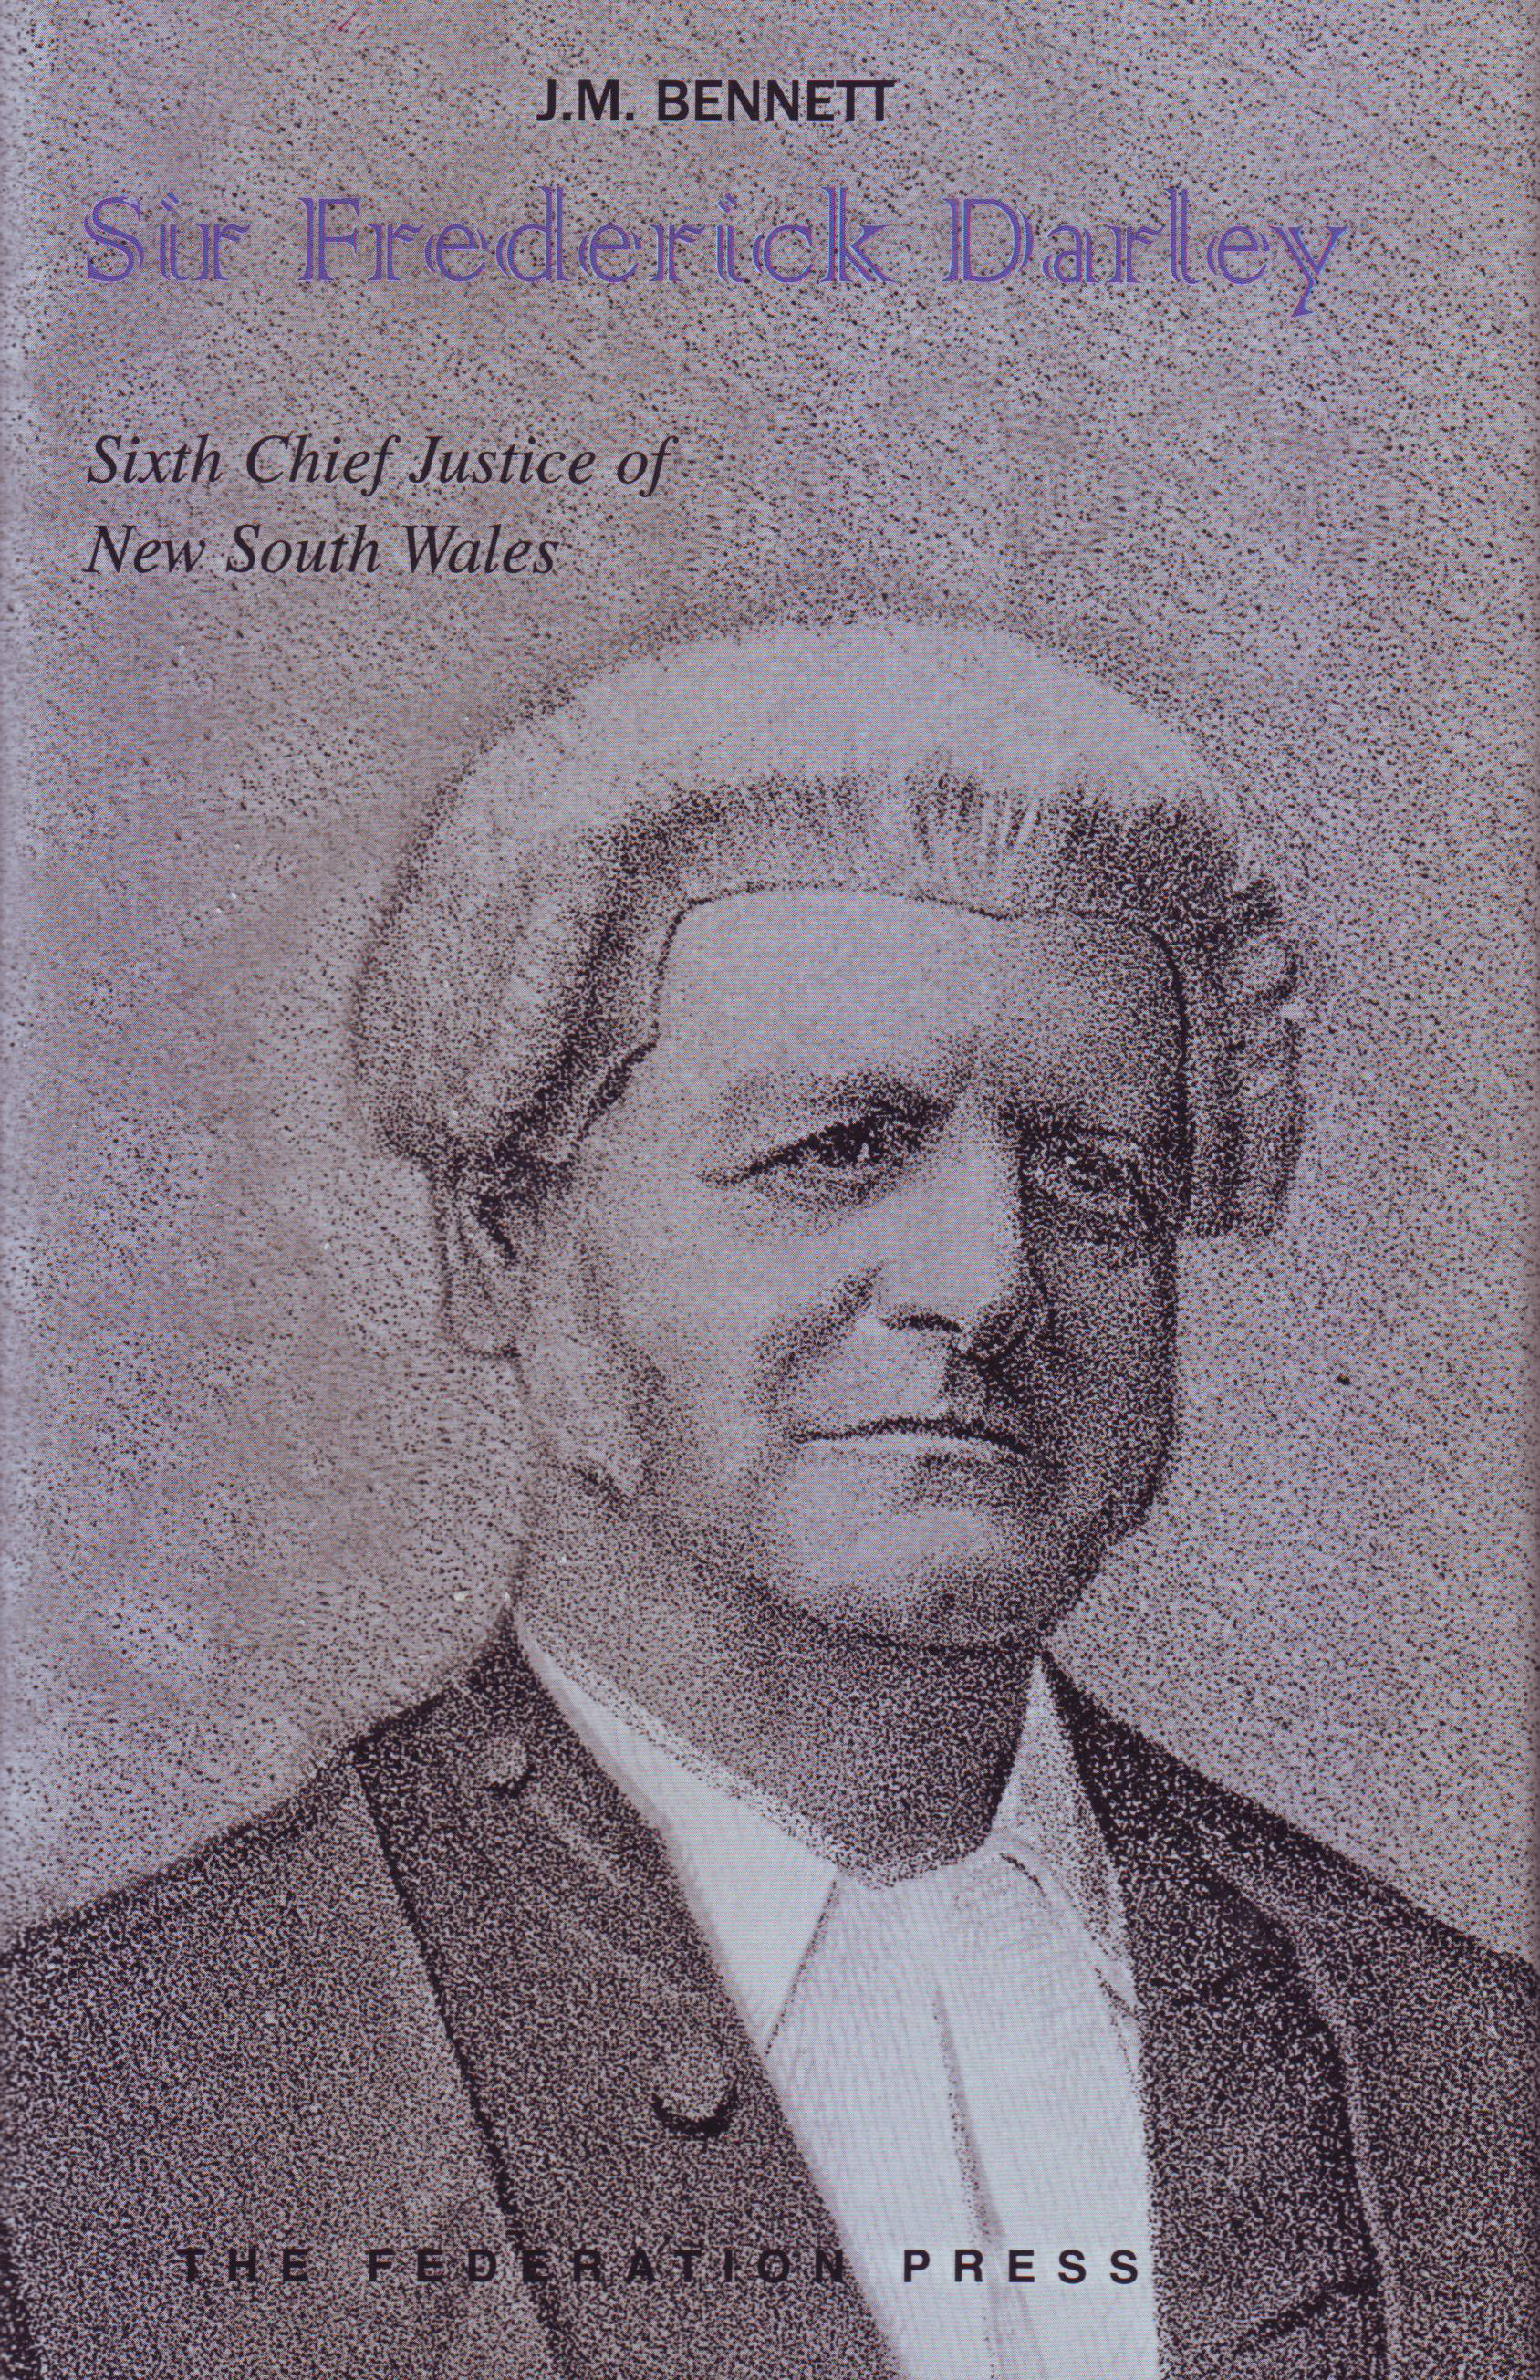 Sir Frederick Darley: Sixth Chief Justice of New South Wales